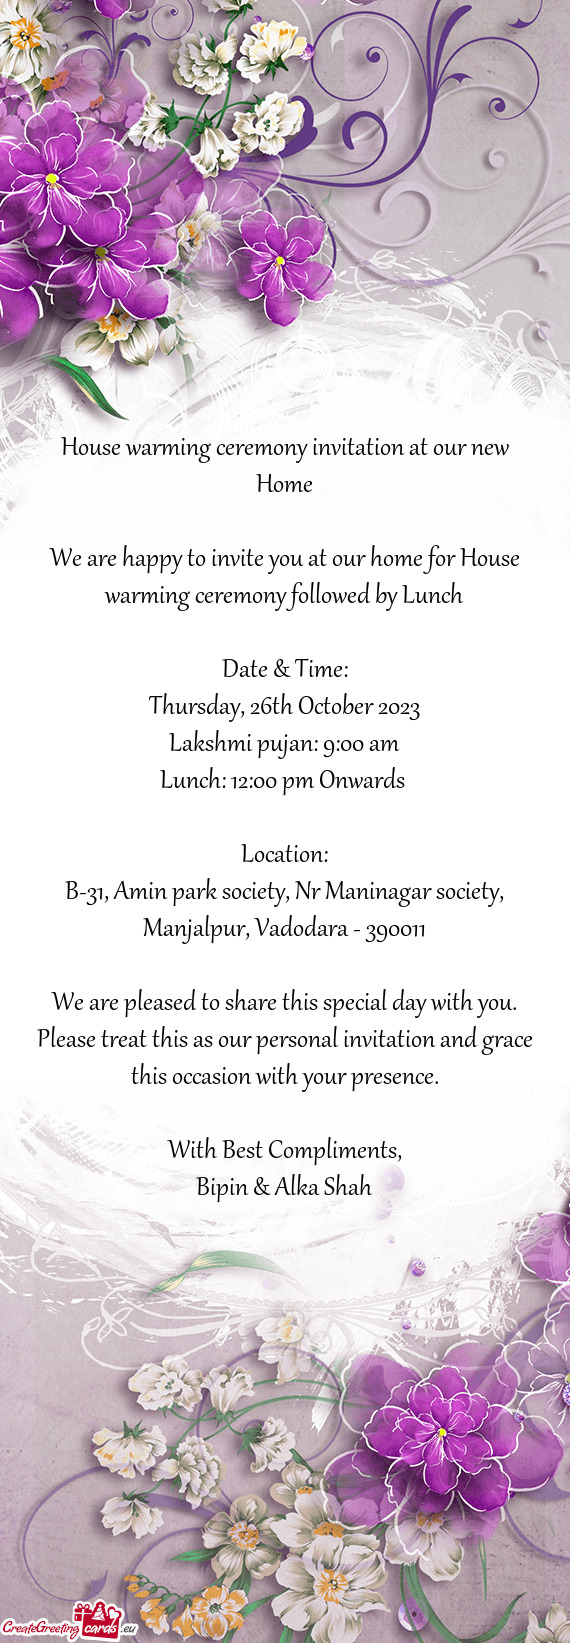 House warming ceremony invitation at our new Home